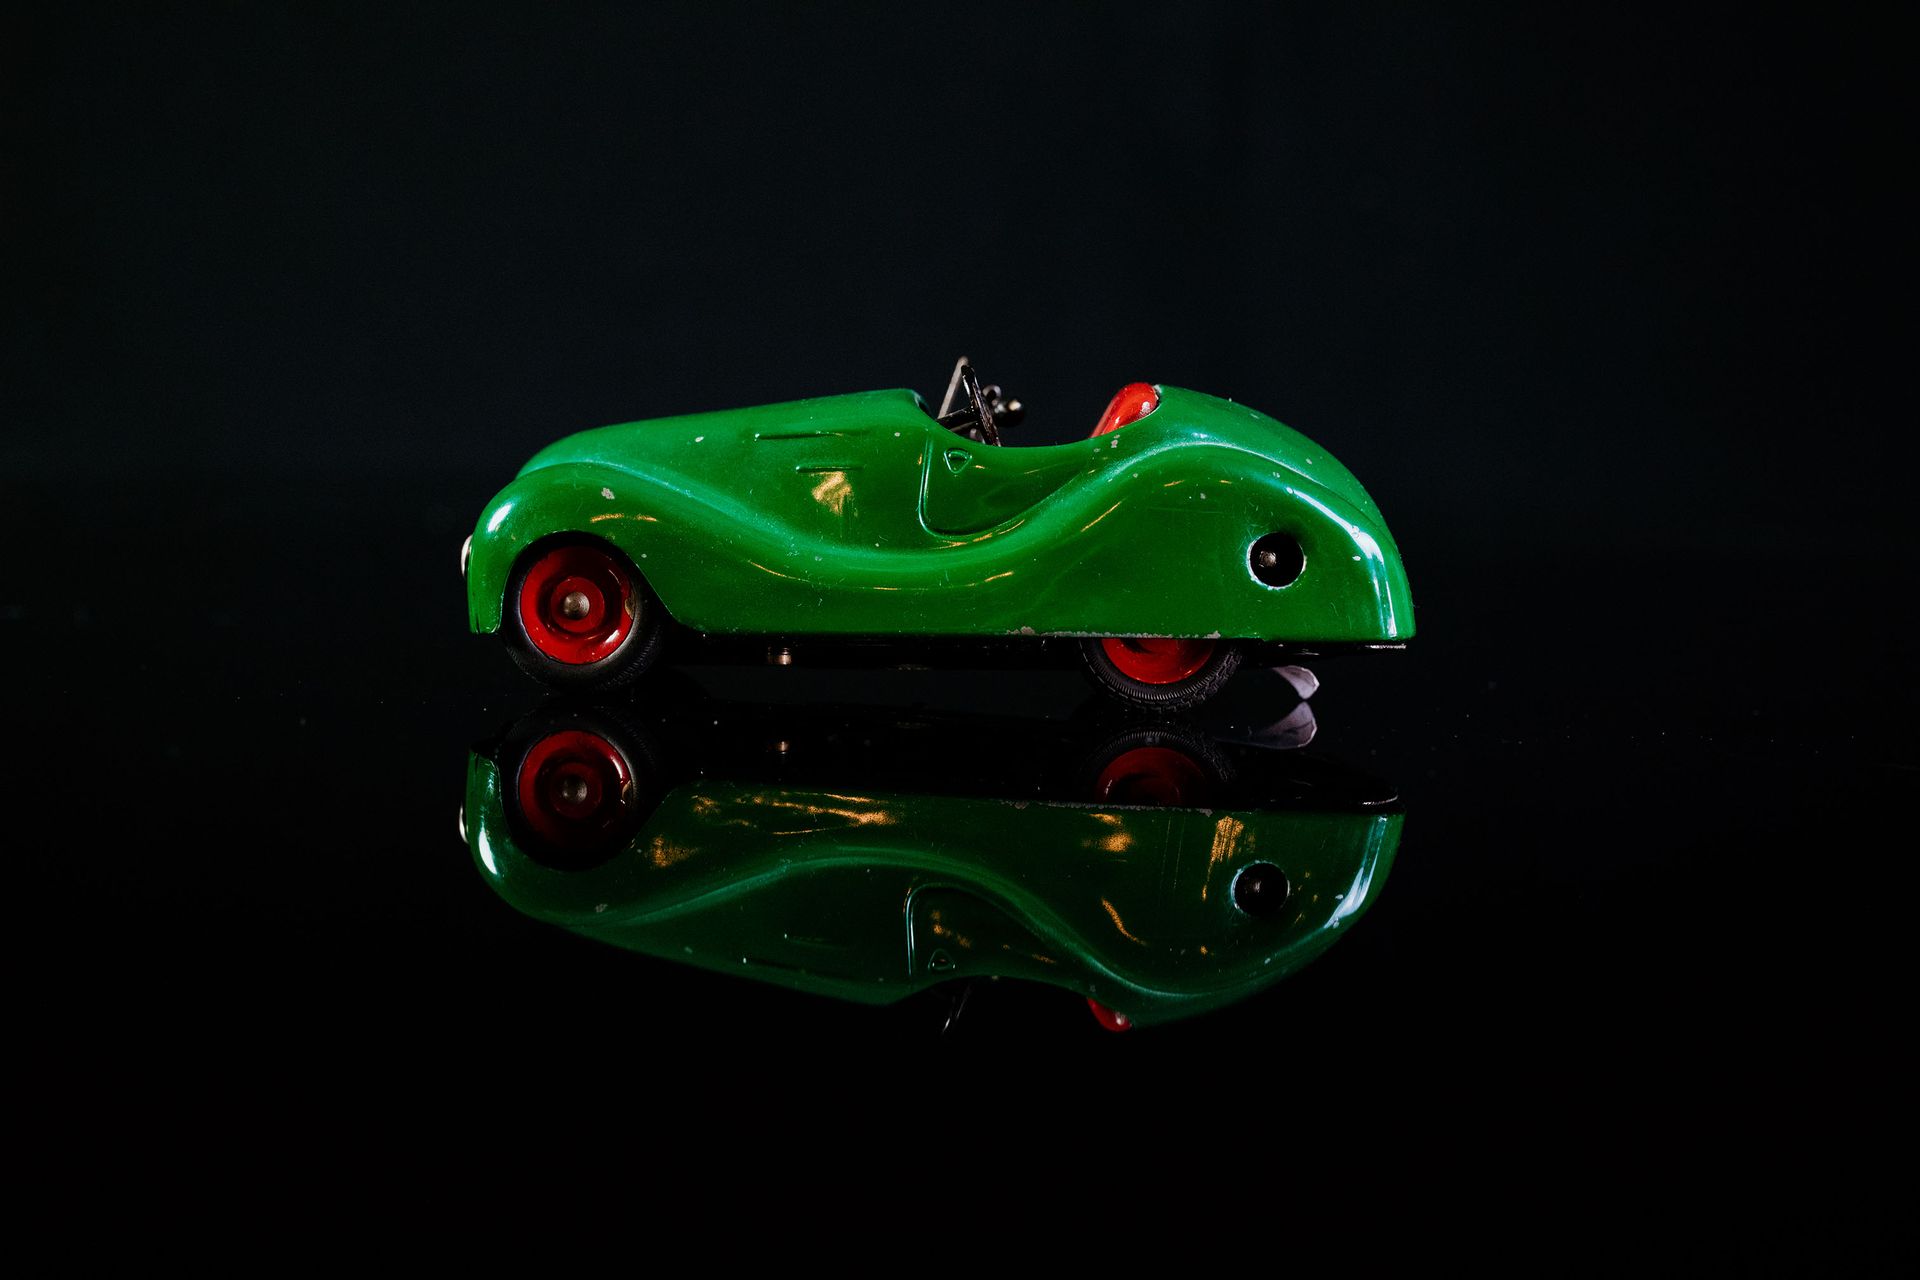 Jibby Musikauto | Jouets Anciens Condition (2) - Tin toy, painted by hand, funct&hellip;